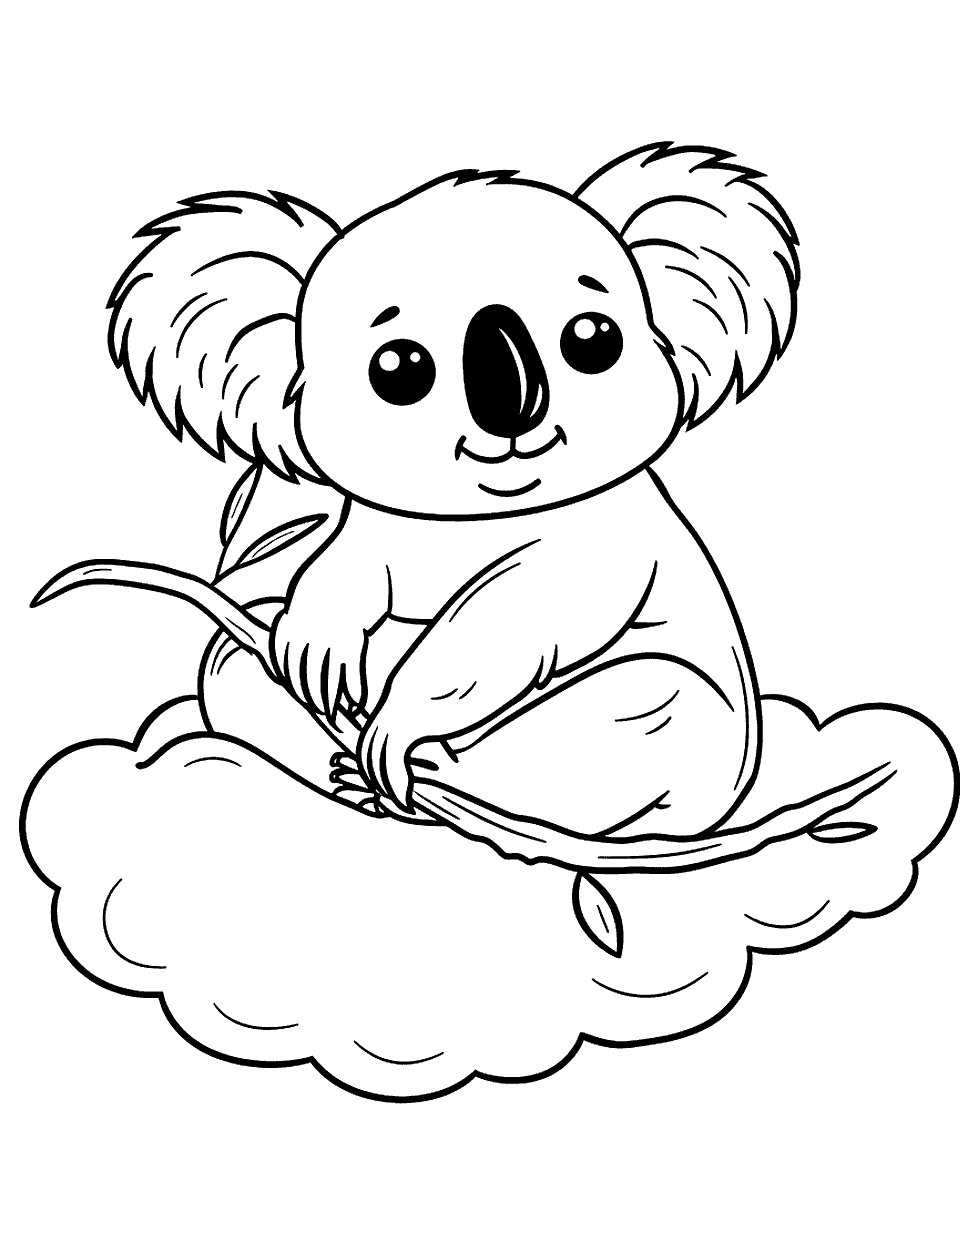 Koala in a Fluffy Cloud Coloring Page - A koala imagined sitting on a fluffy cloud, drifting across the sky.